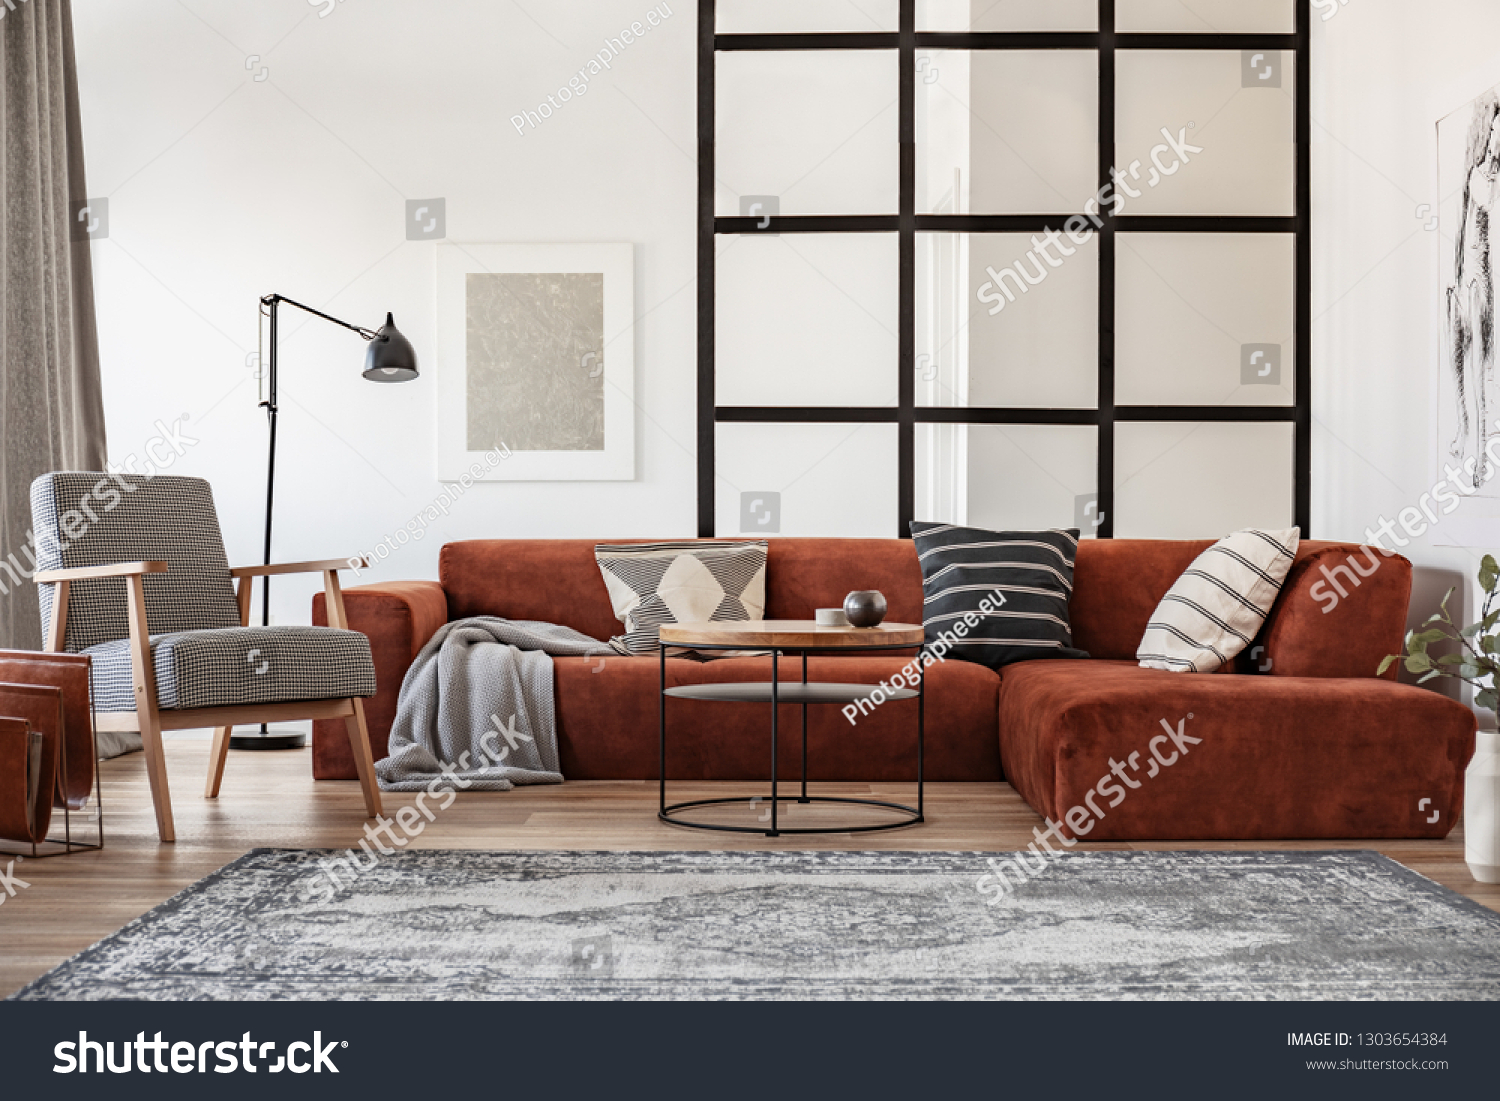 Silver painting on white wall of elegant living room interior with brown corner sofa with pillows #1303654384